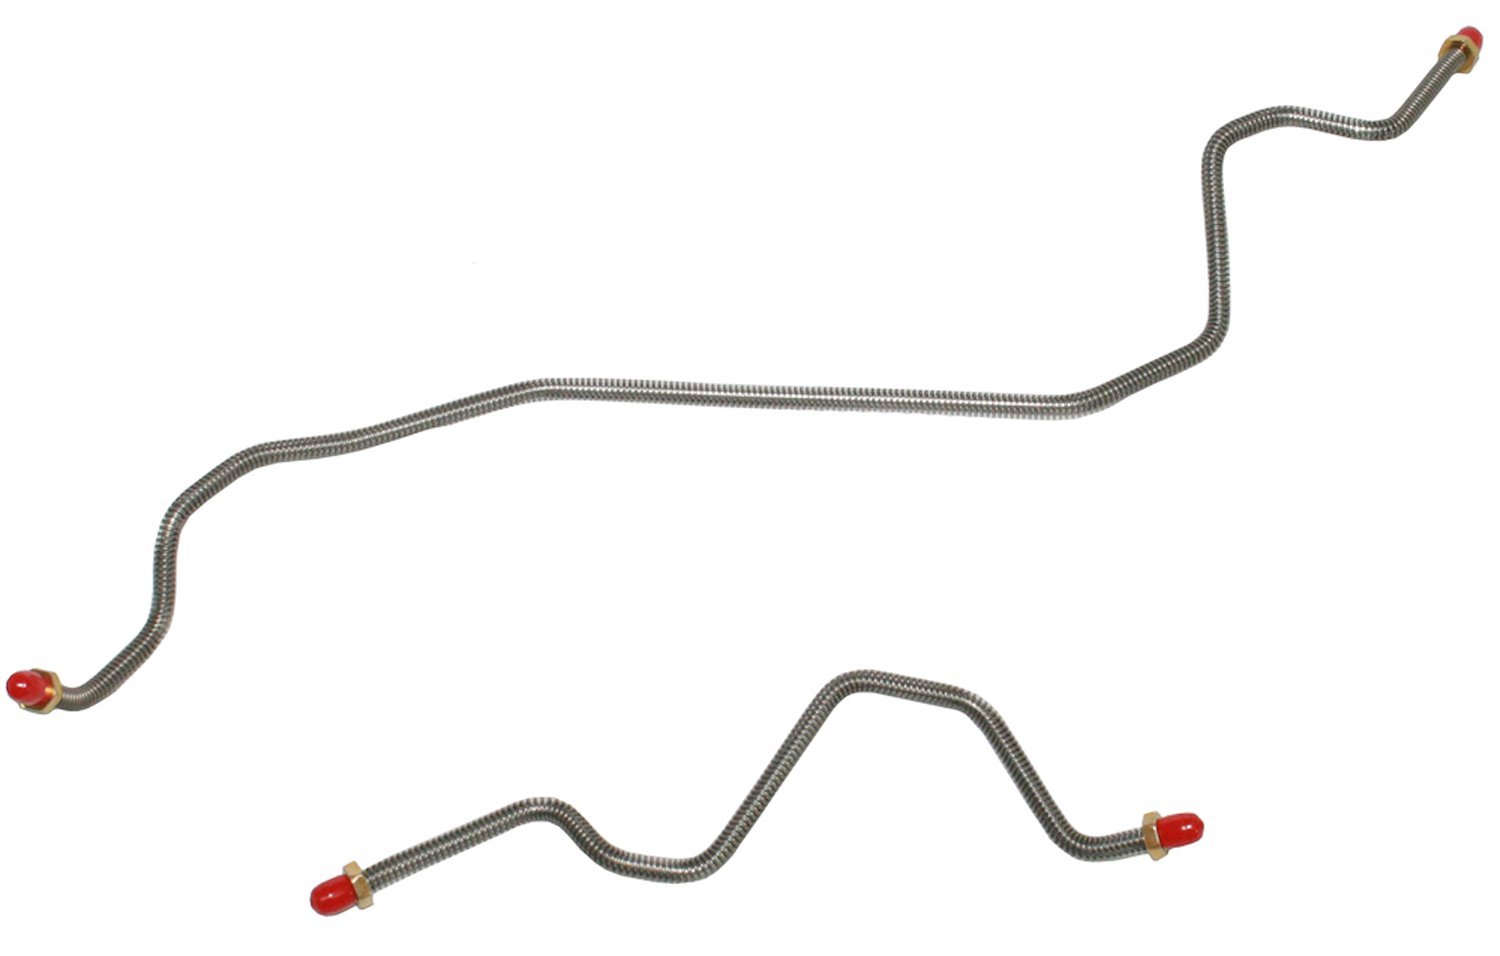 Rear Axle Brake Line Set for 1998-2004 Chevy S-10, Blazer, GMC Sonoma, Jimmy Trucks with Rear Disc Brakes [Stainless Steel]